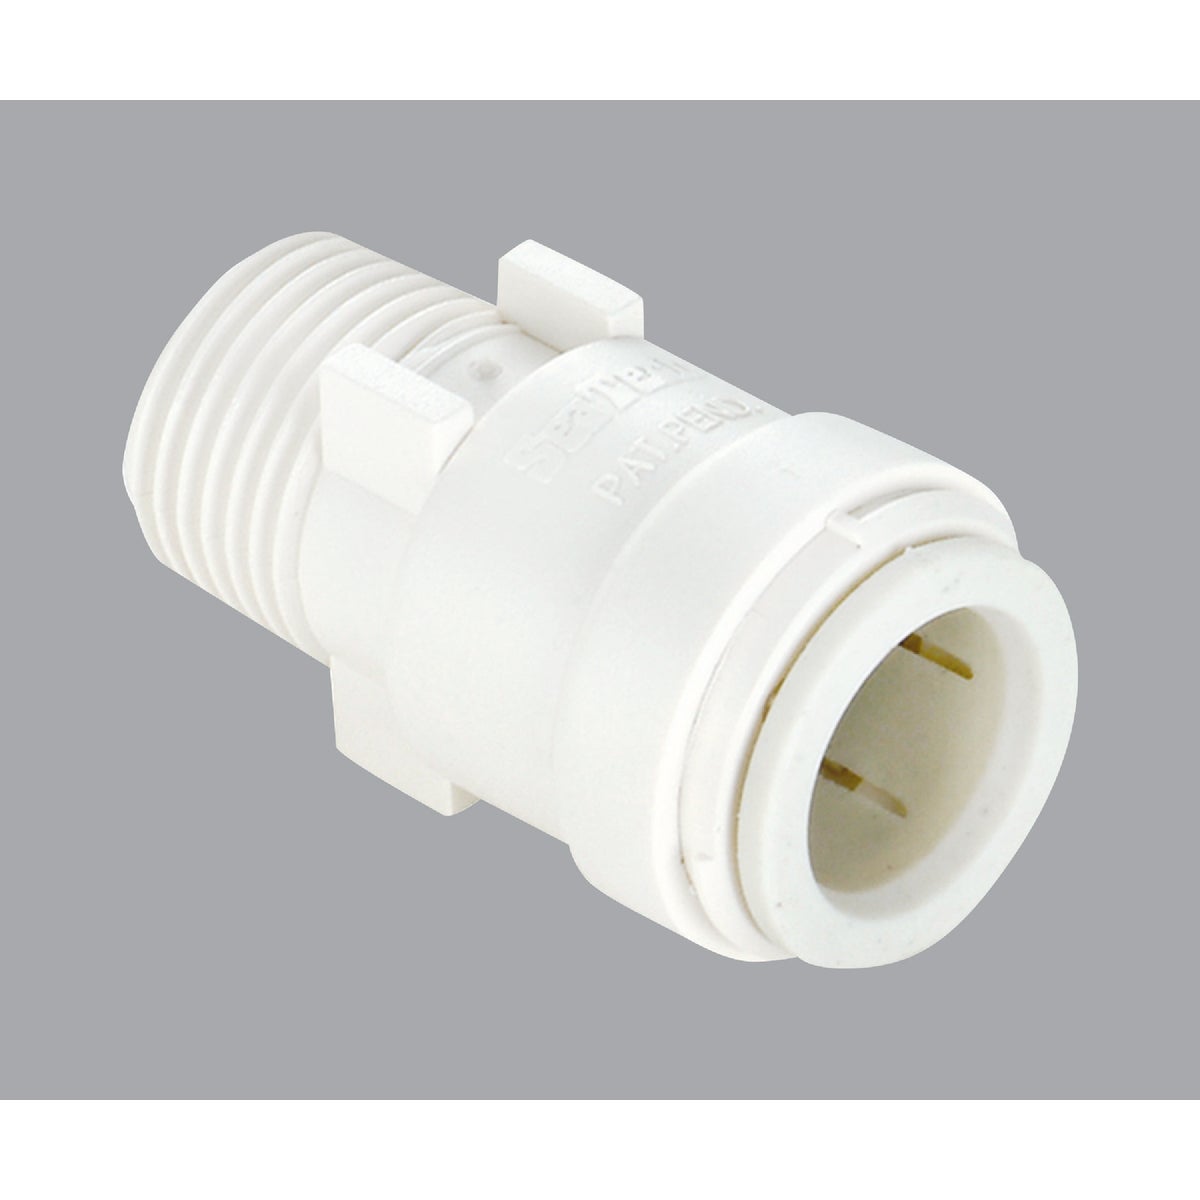 Watts Aqualock 1/2 In. CTS x 3/4 In. MPT Quick Connect Plastic Connector